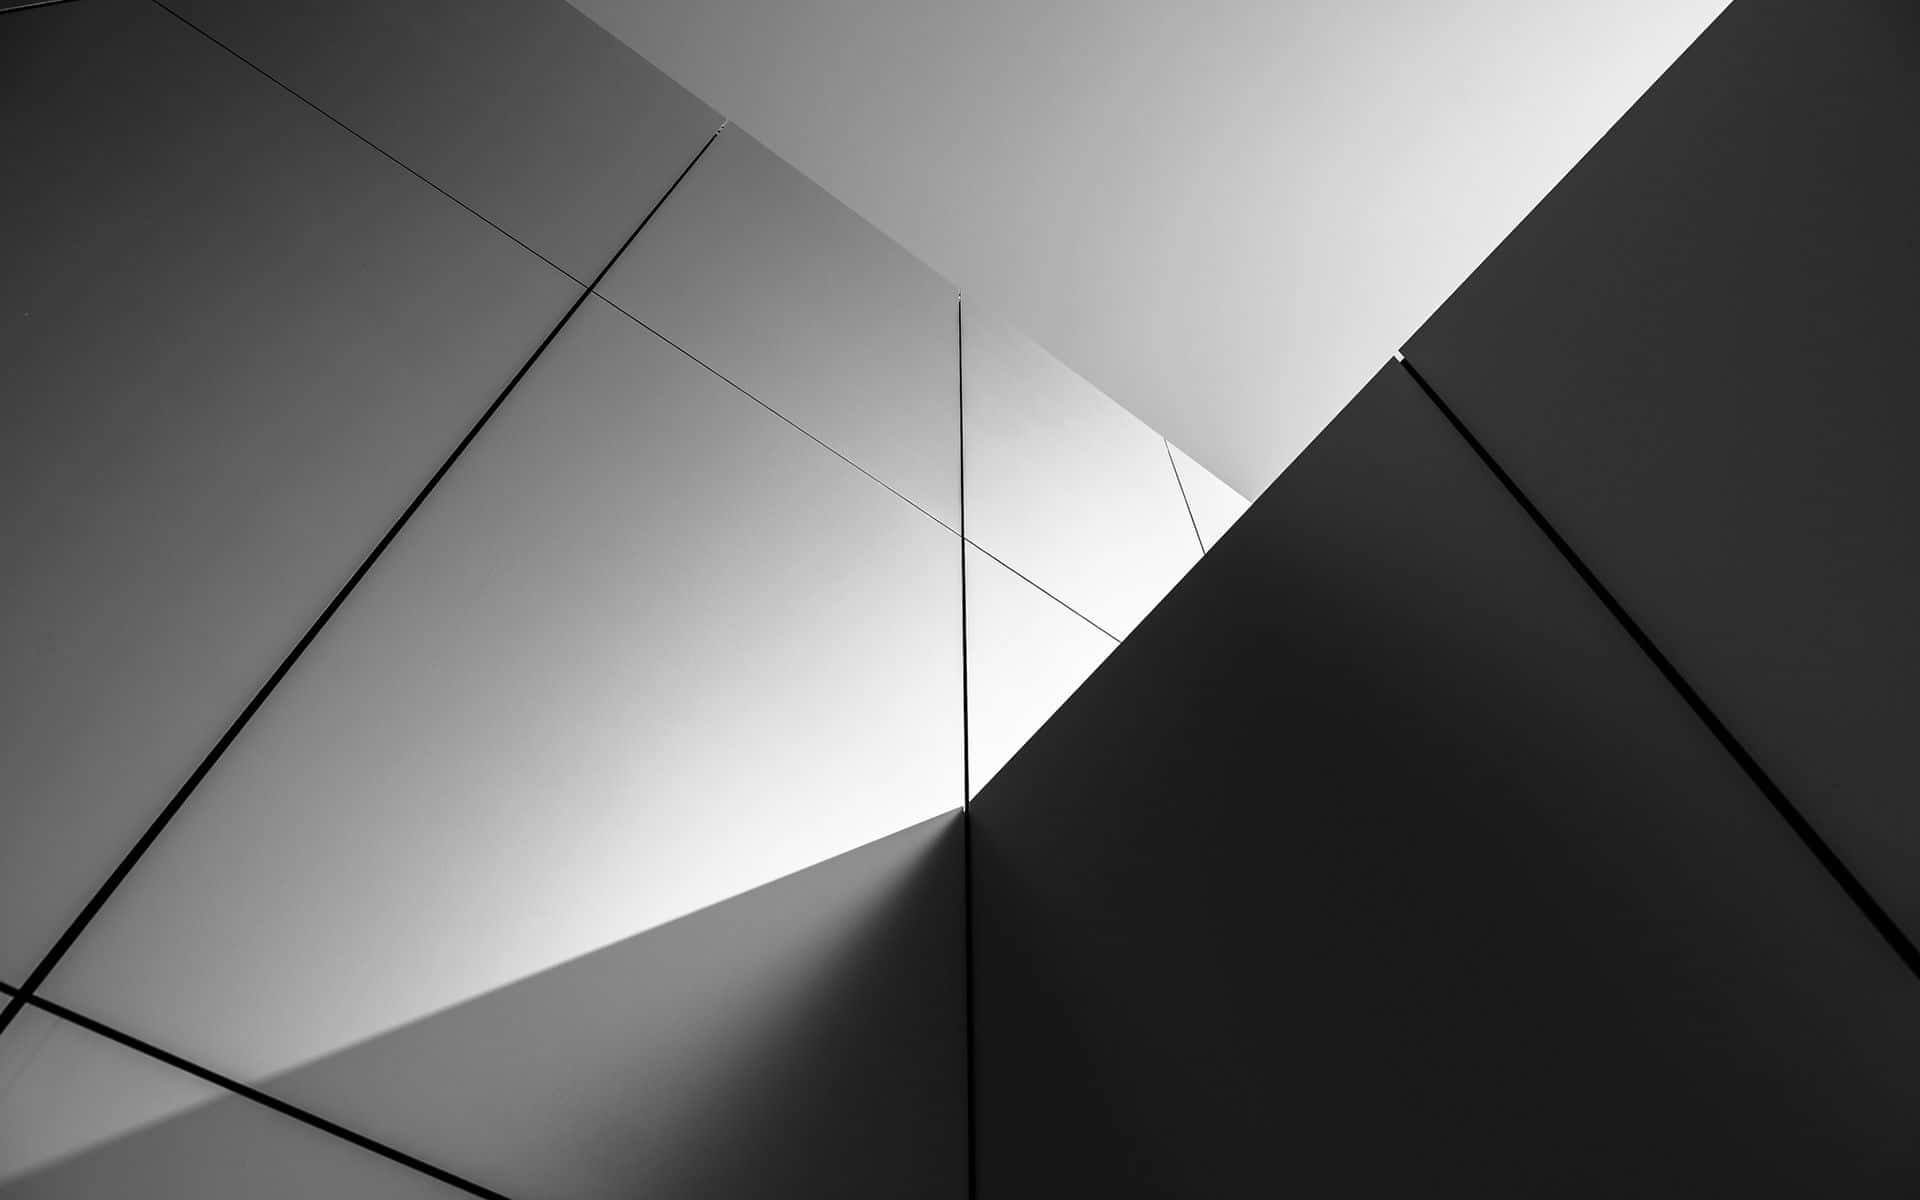 Monochrome Building With Grey Surface